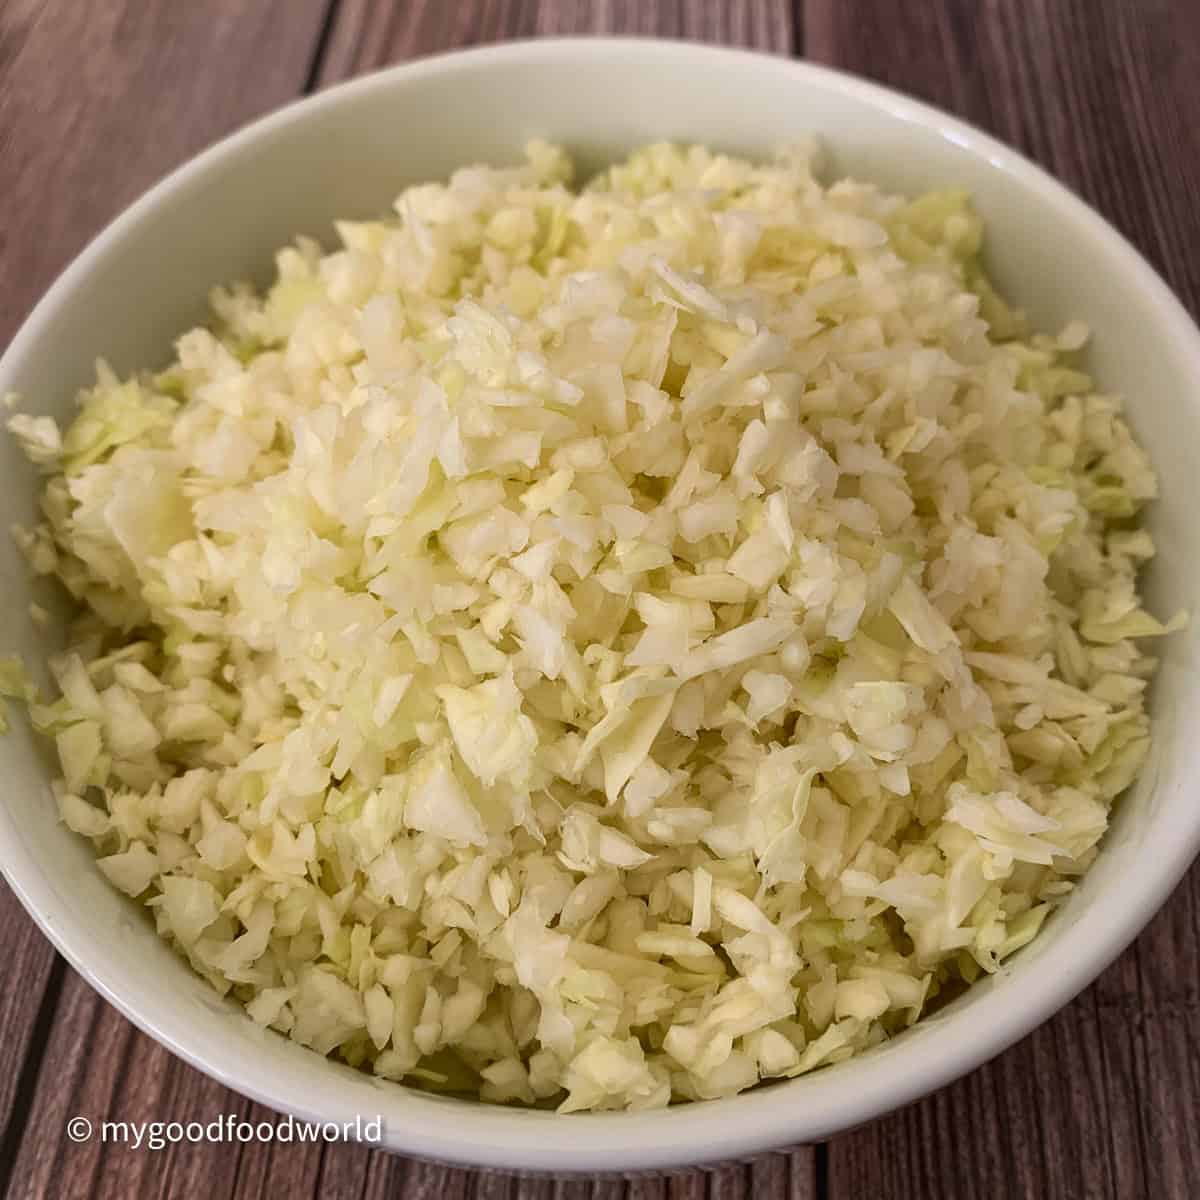 A close-up picture of finely chopped muttaiakose placed on a white round bowl.